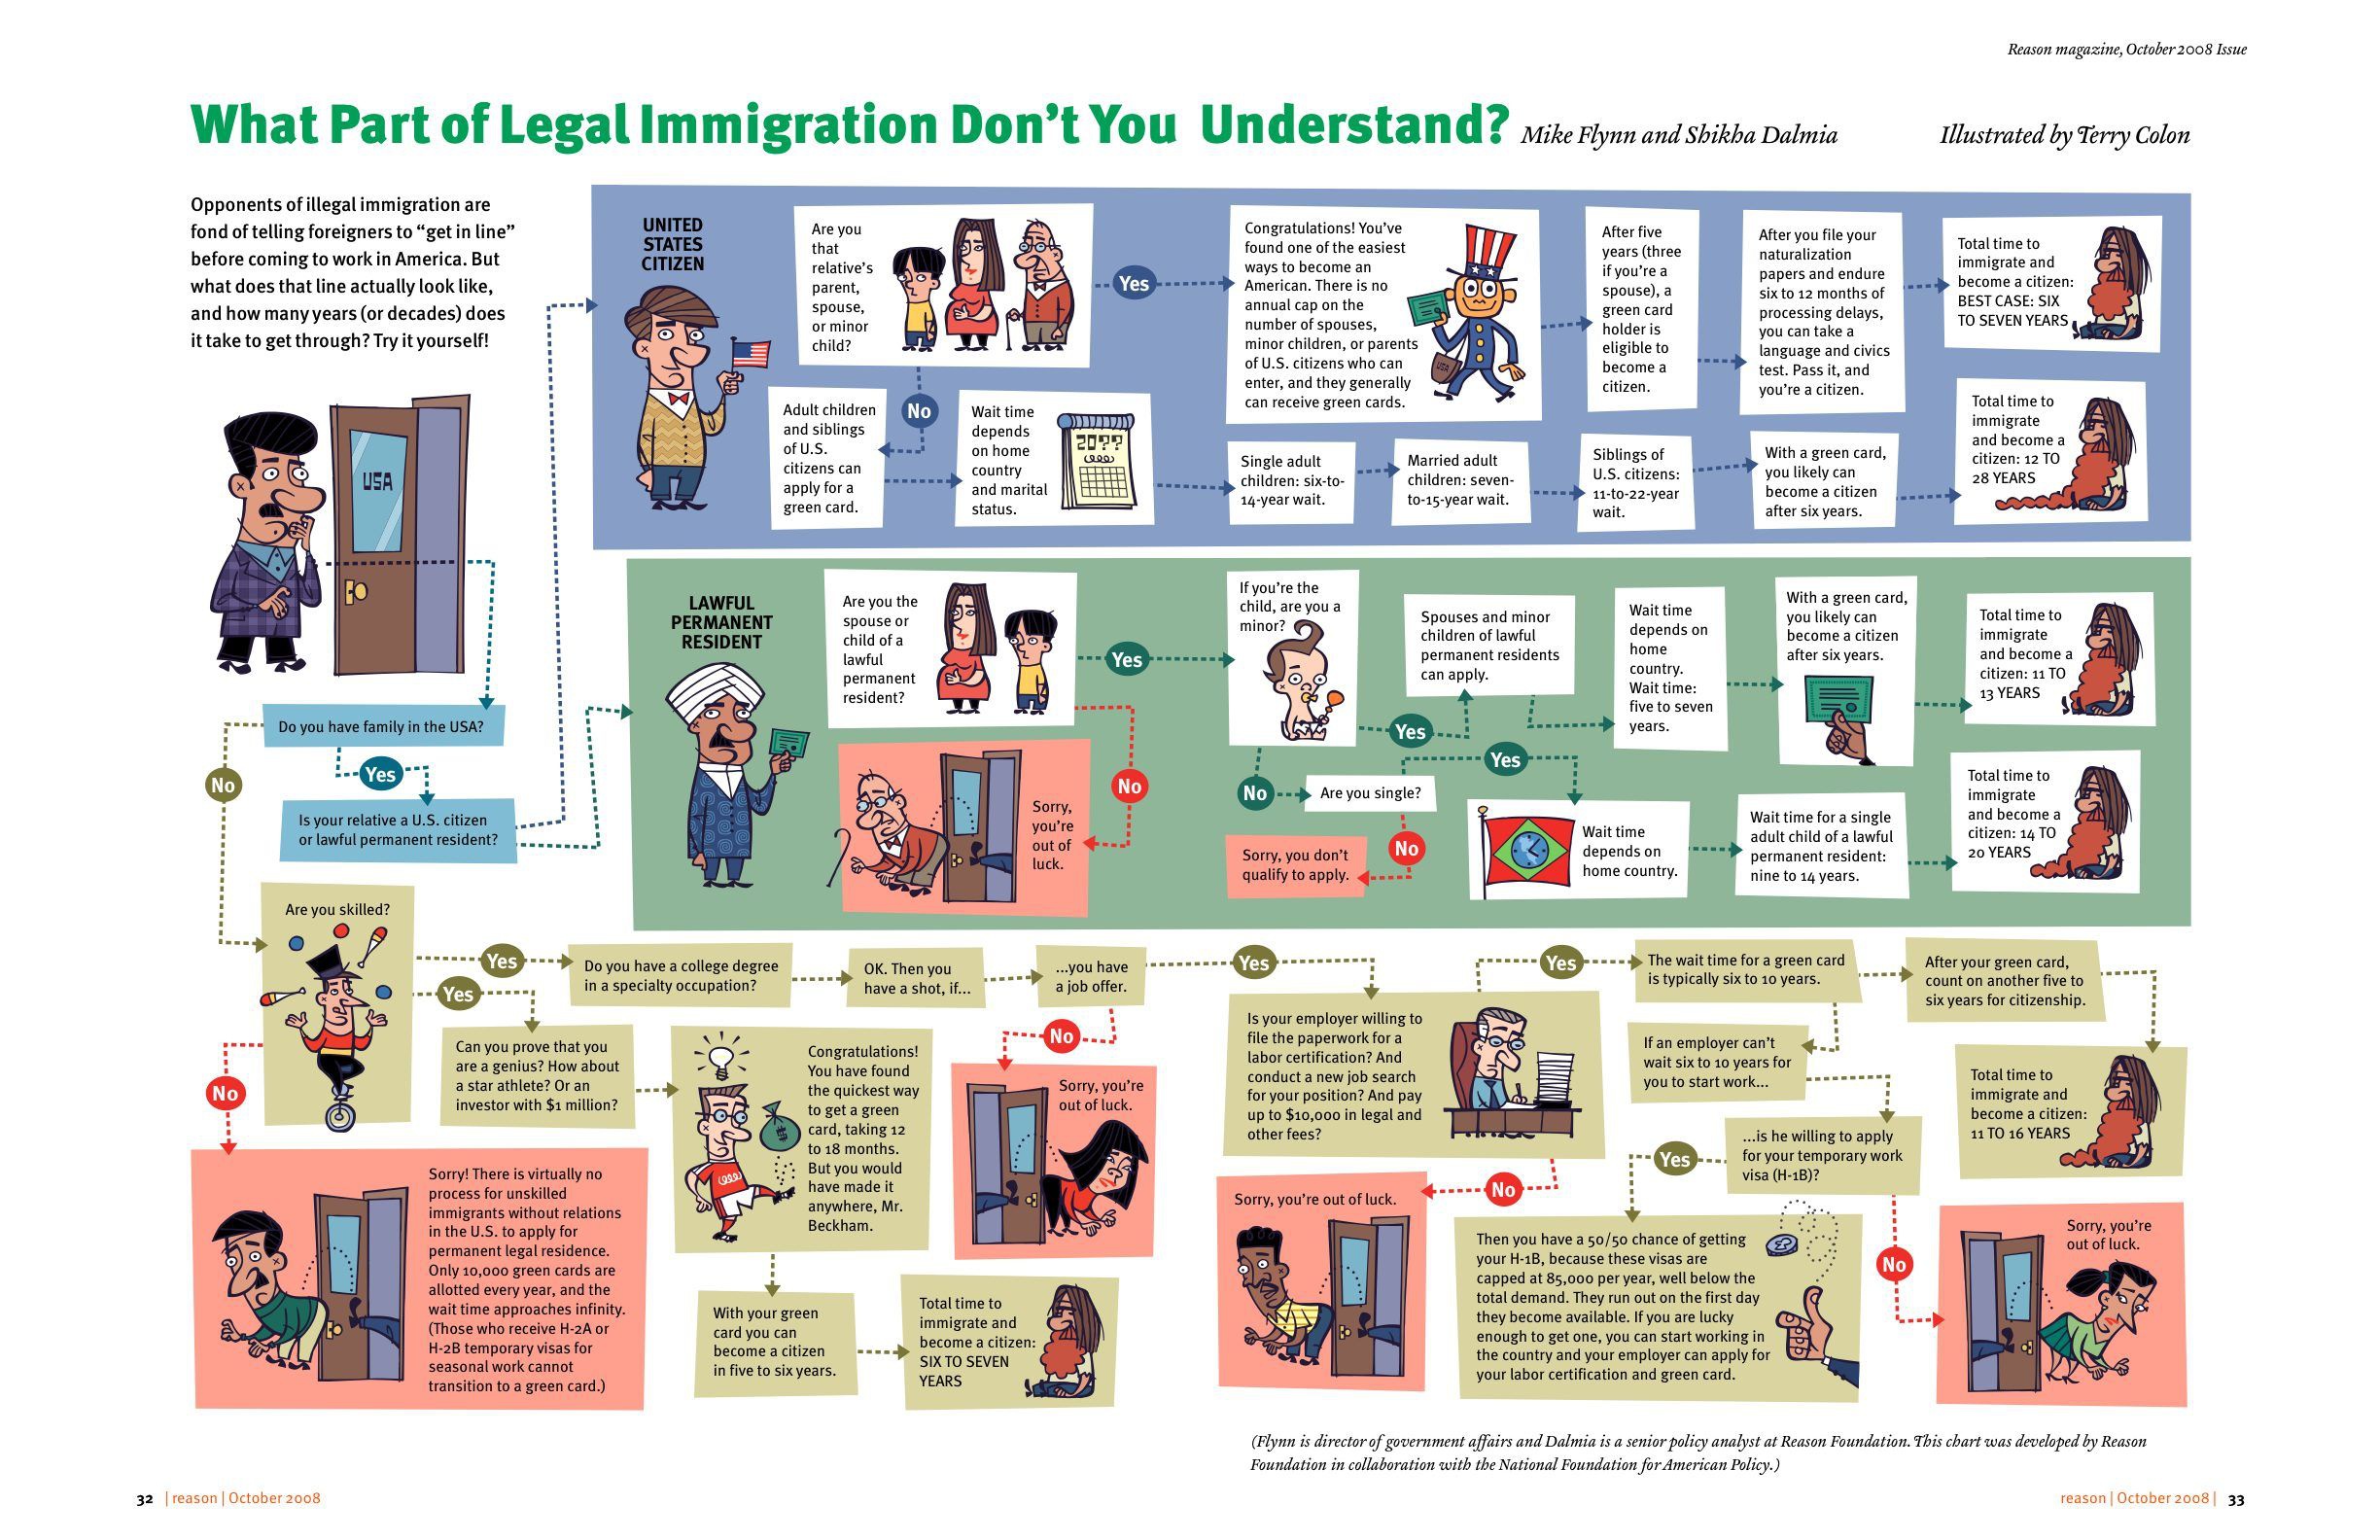 an image that shows
        how difficult it is to get into the USA as a legal immigrant